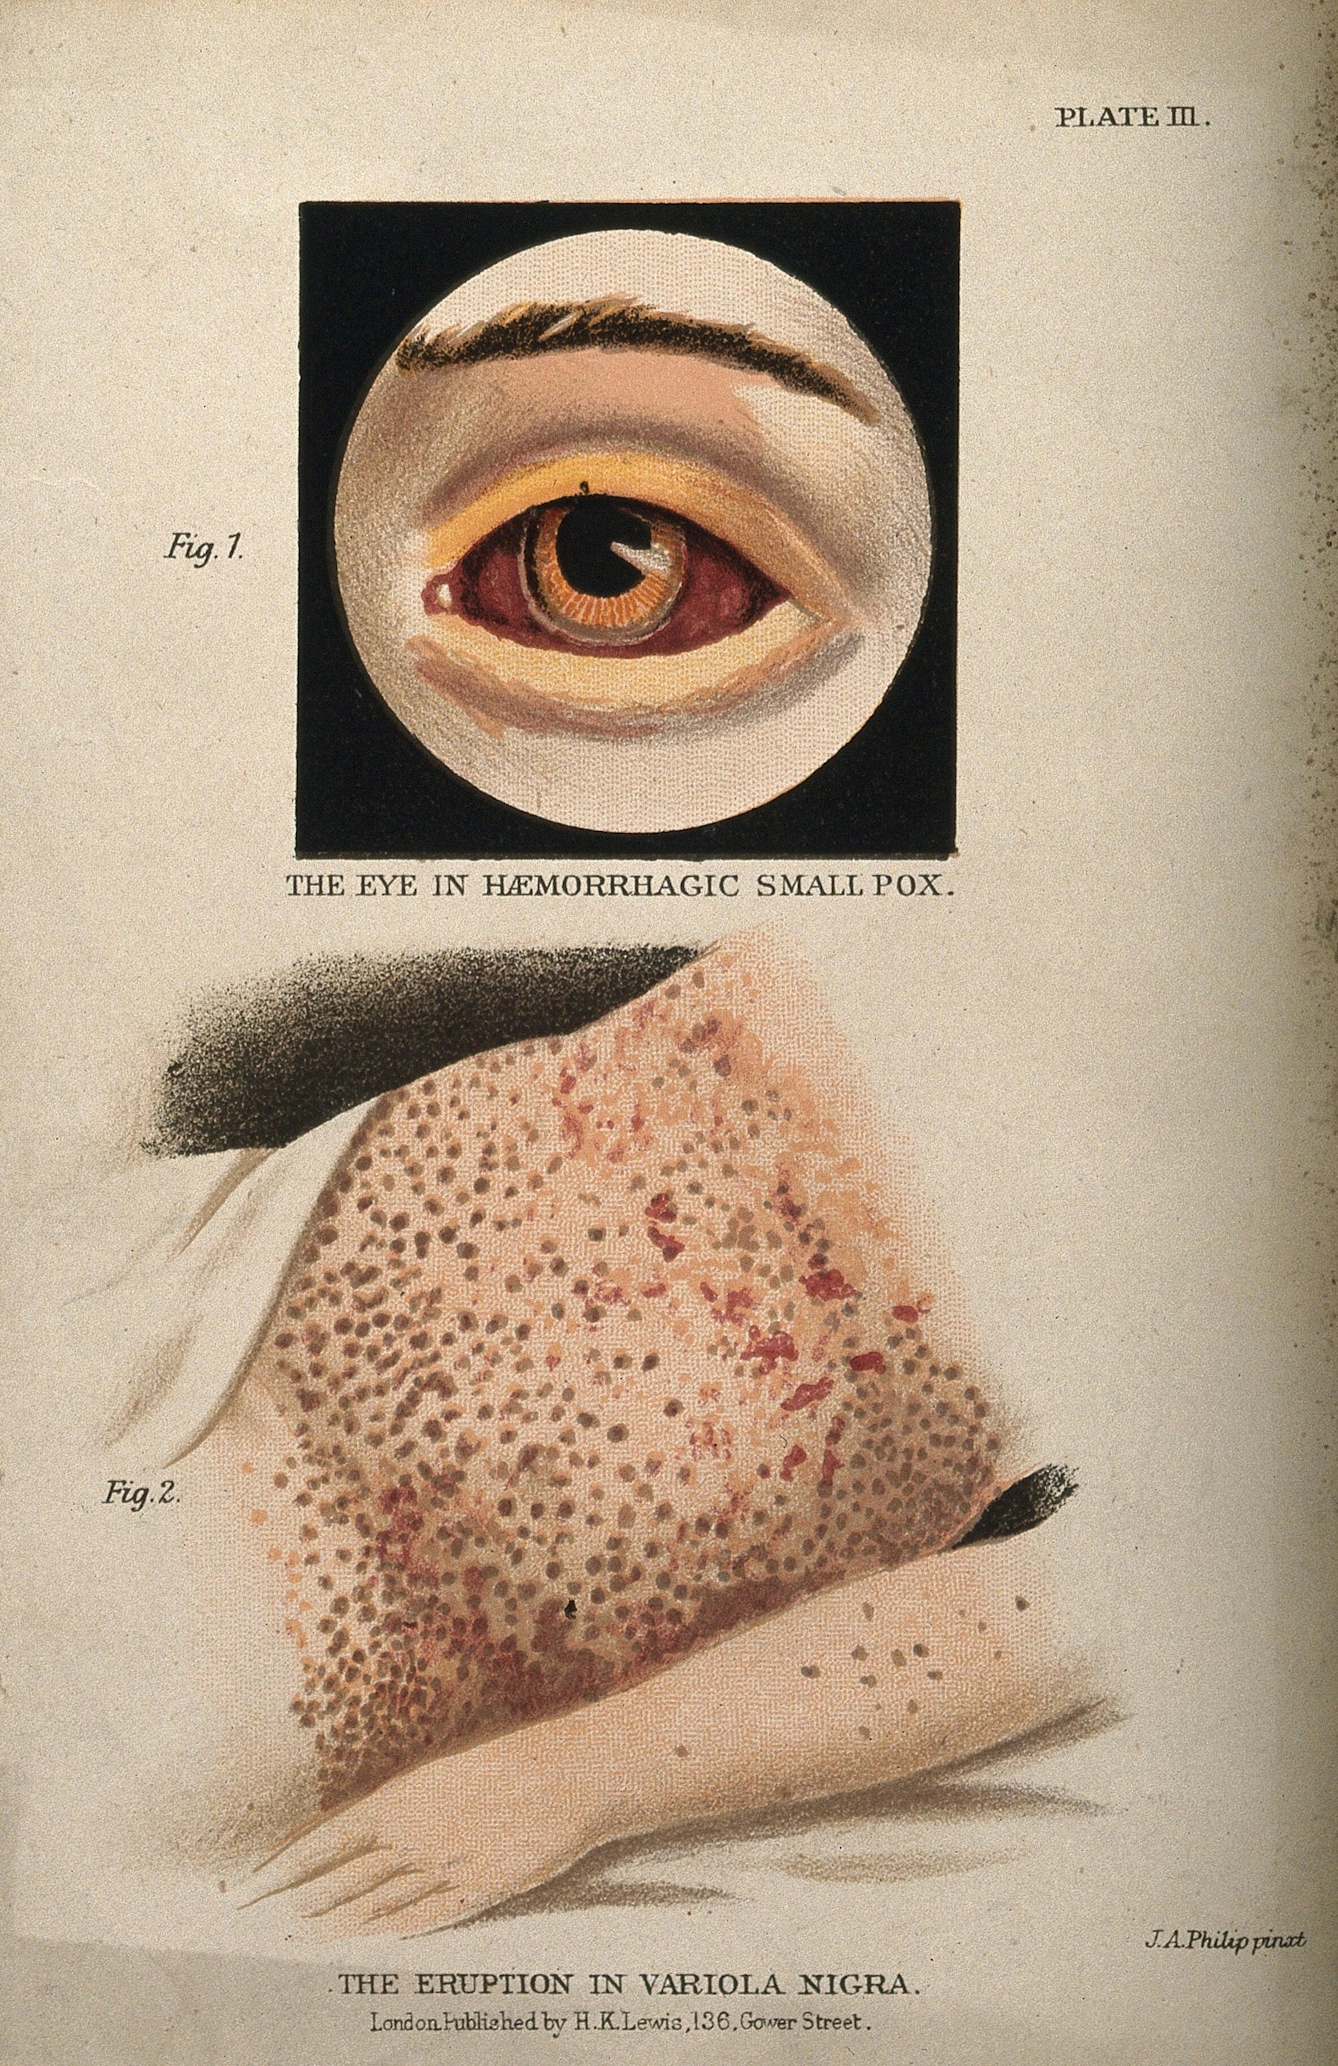 A colour illustration featuring two images. The top image shows a bloodshot eye against a black background. The bottom image shows the stomach and arm of a person; the skin is covered in dark red spots.